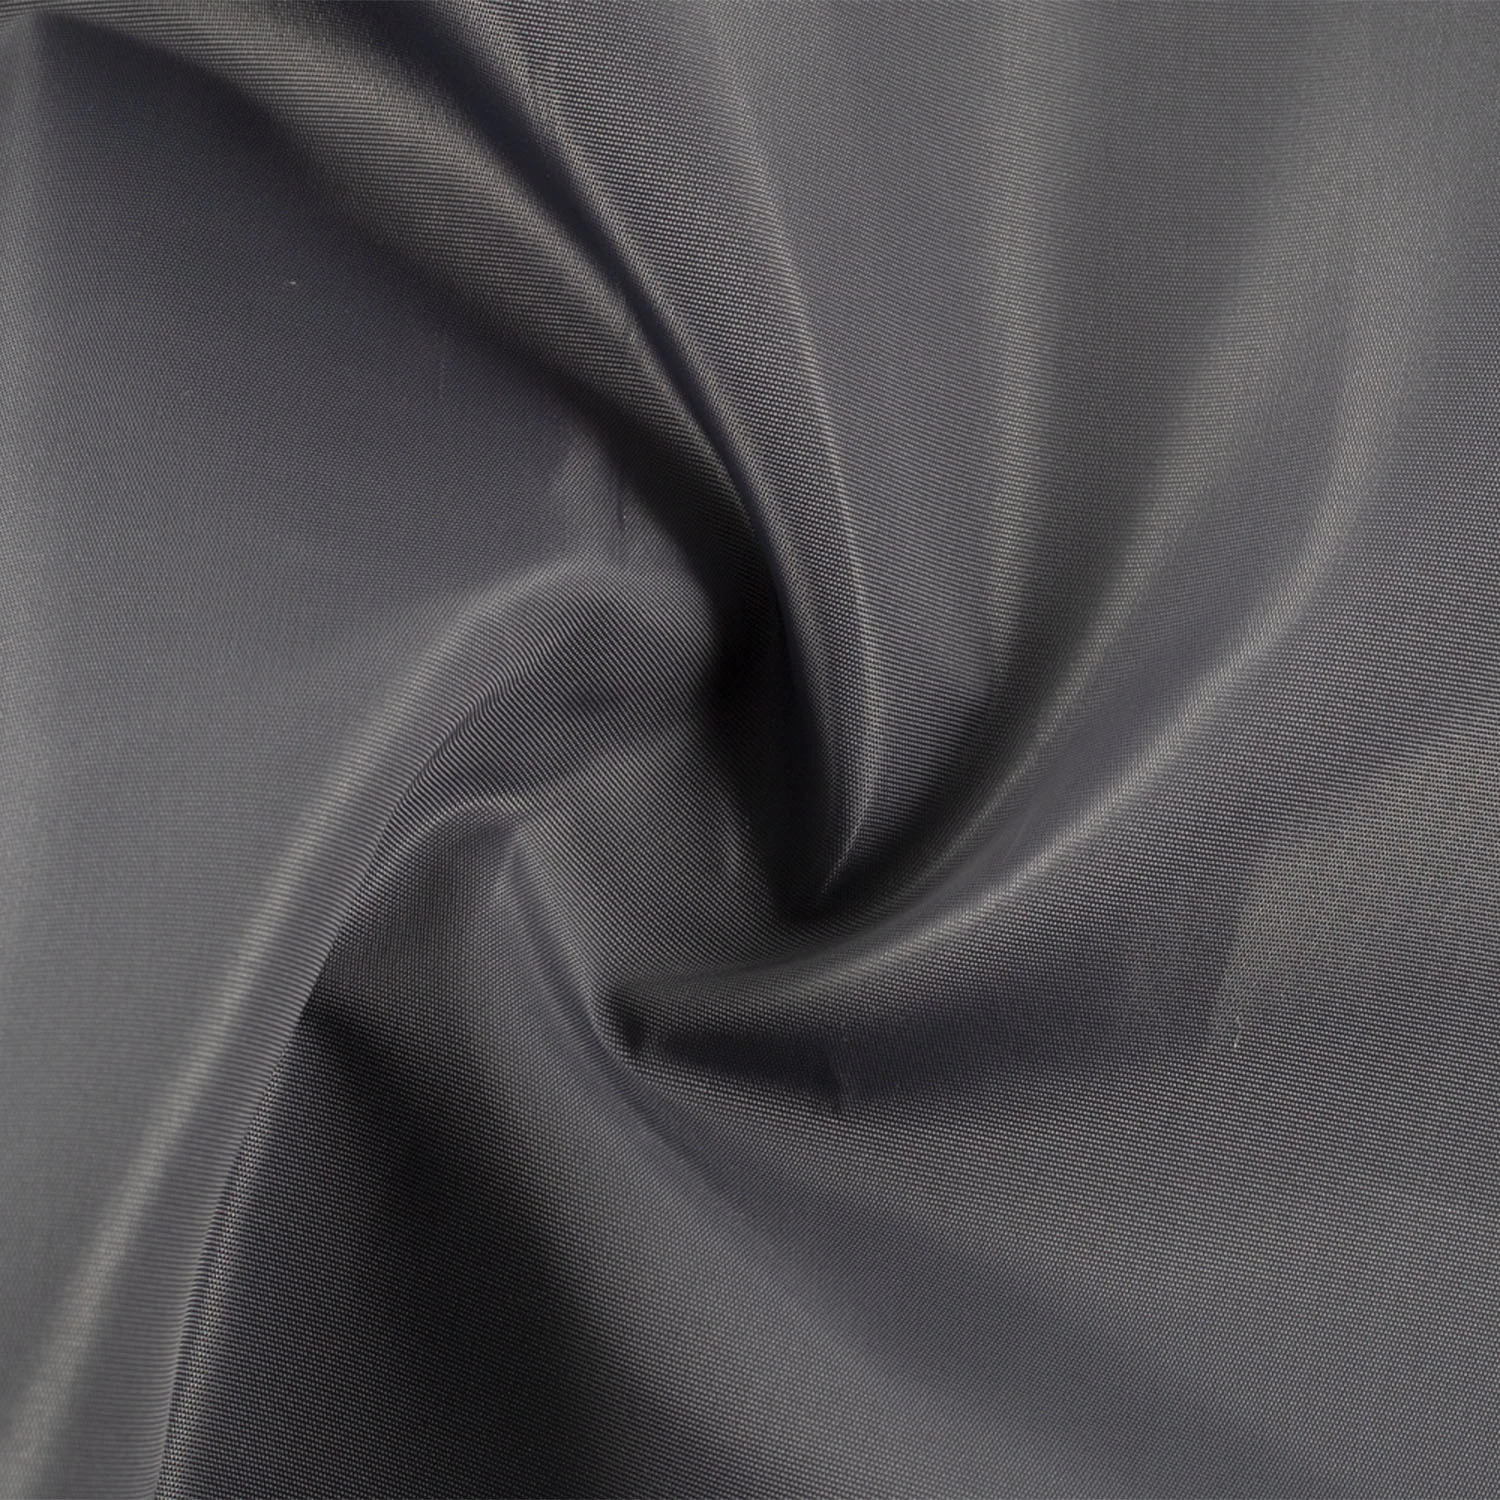 Wholesale Woven Plain Style 75D Cotton Feeling Memory 300t Waterproof 100% Polyester Fabric for Cushions Pillows Bags